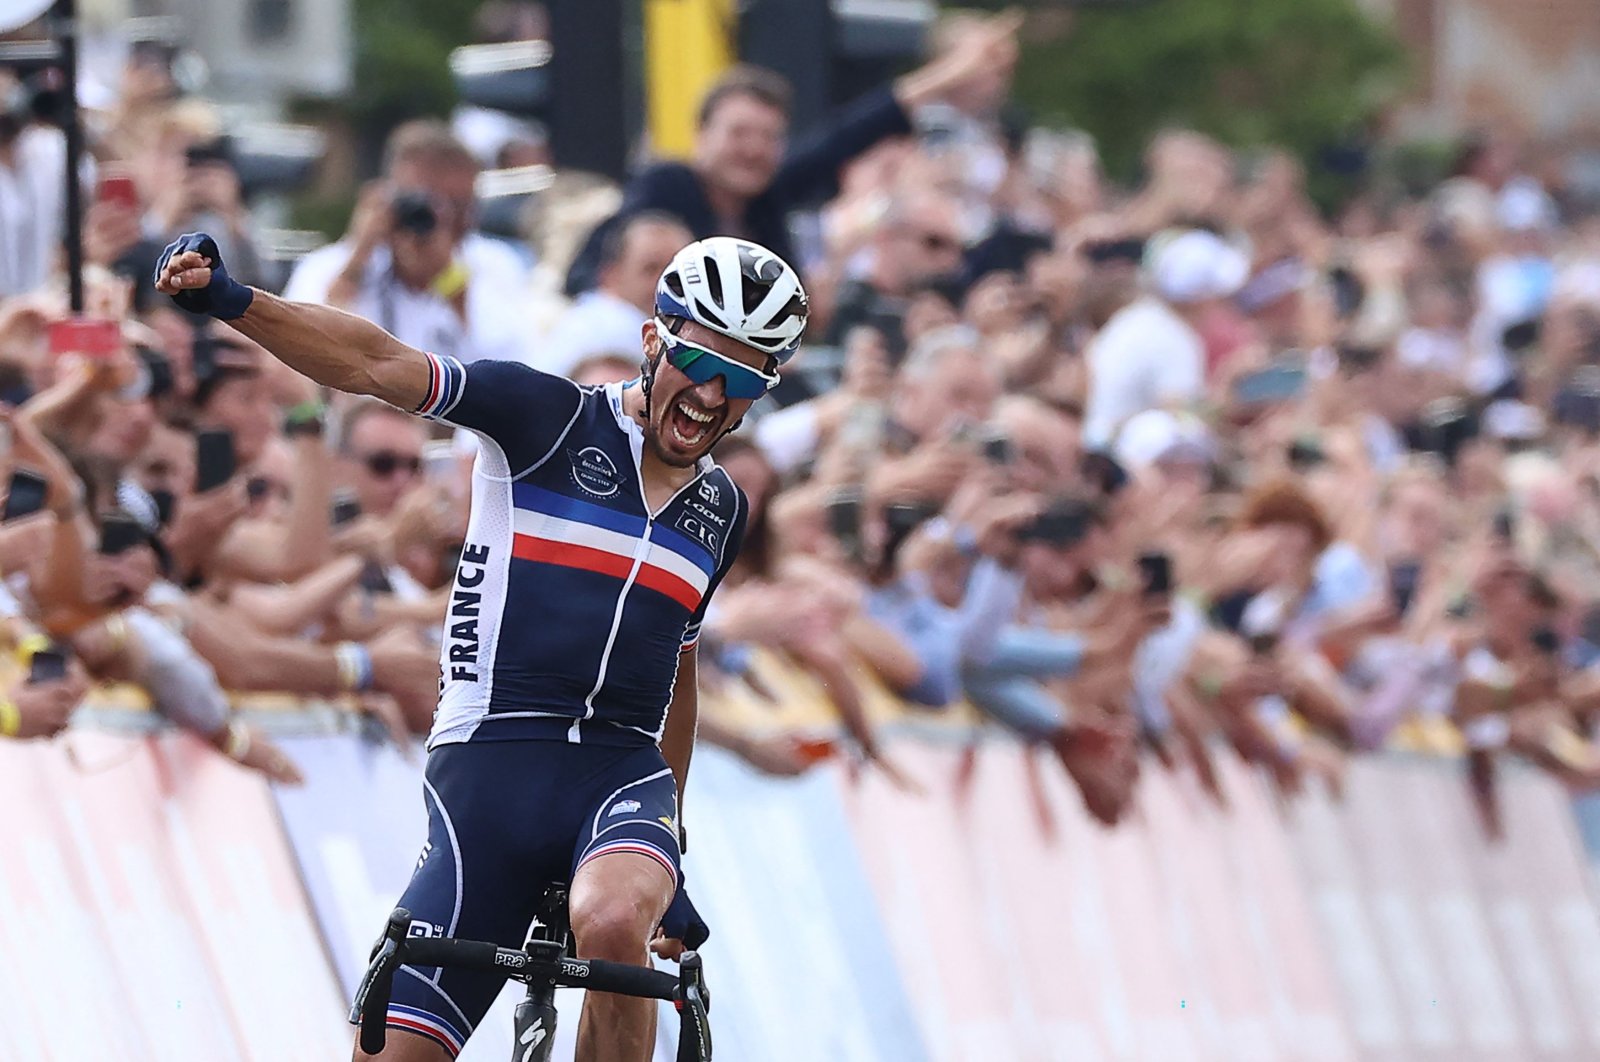 France's Julian Alaphilippe celebrates winning the men's cycling road race, 268.3 kilometers from Antwerp to Leuvenduring the 2021 Road World Championships, Sept. 26, 2021, in Leuven, Belgium. (AFP Photo)